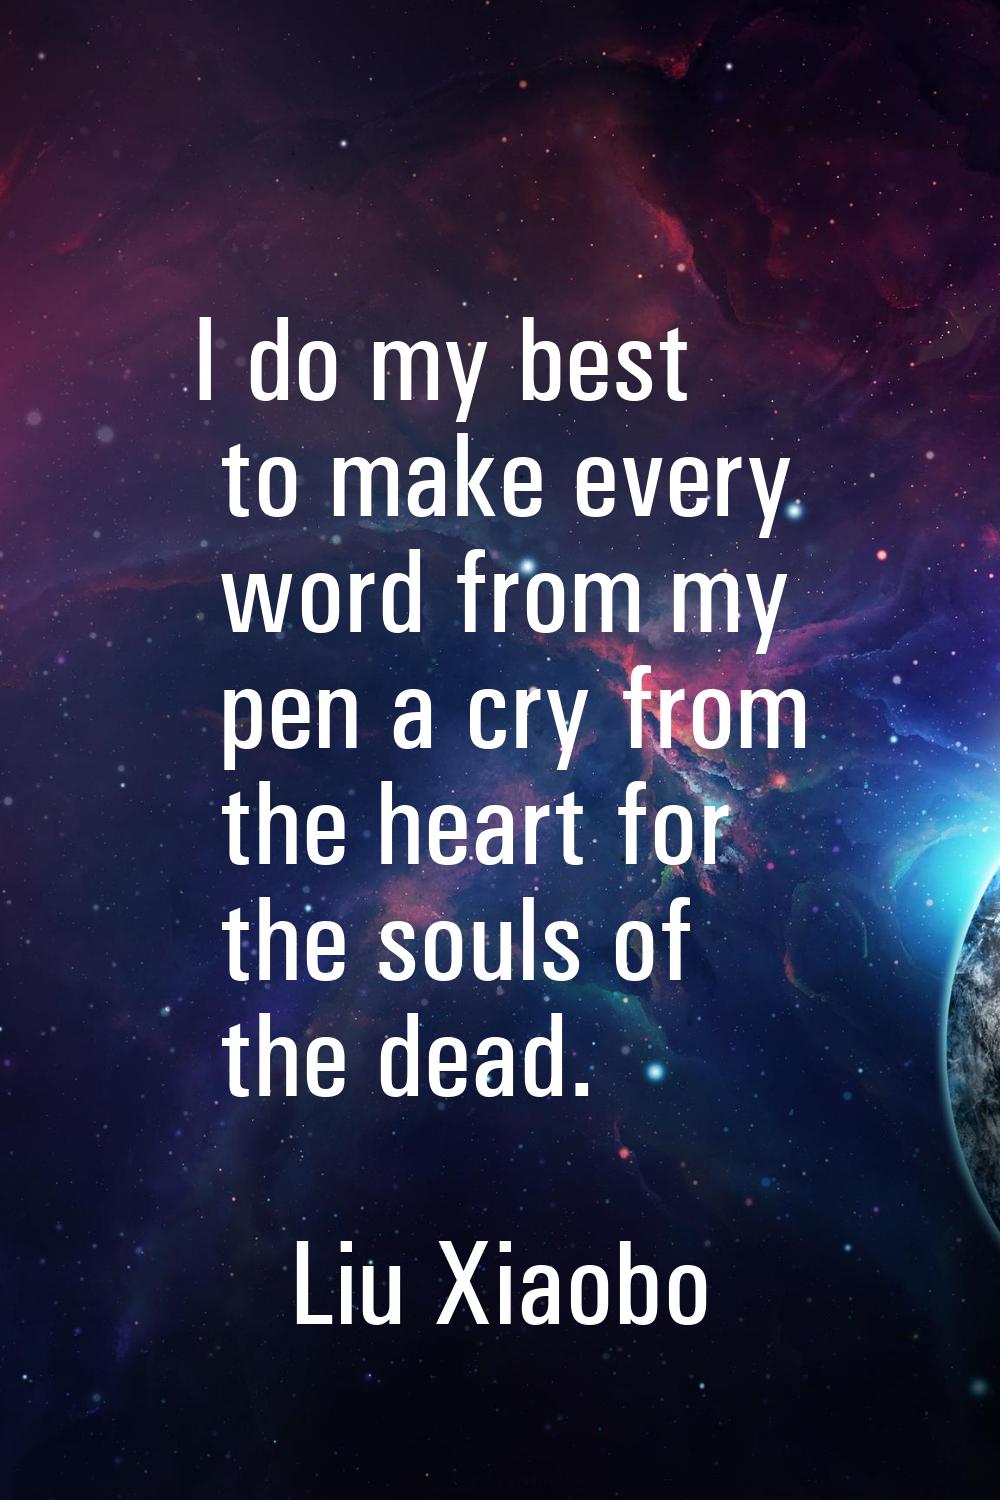 I do my best to make every word from my pen a cry from the heart for the souls of the dead.